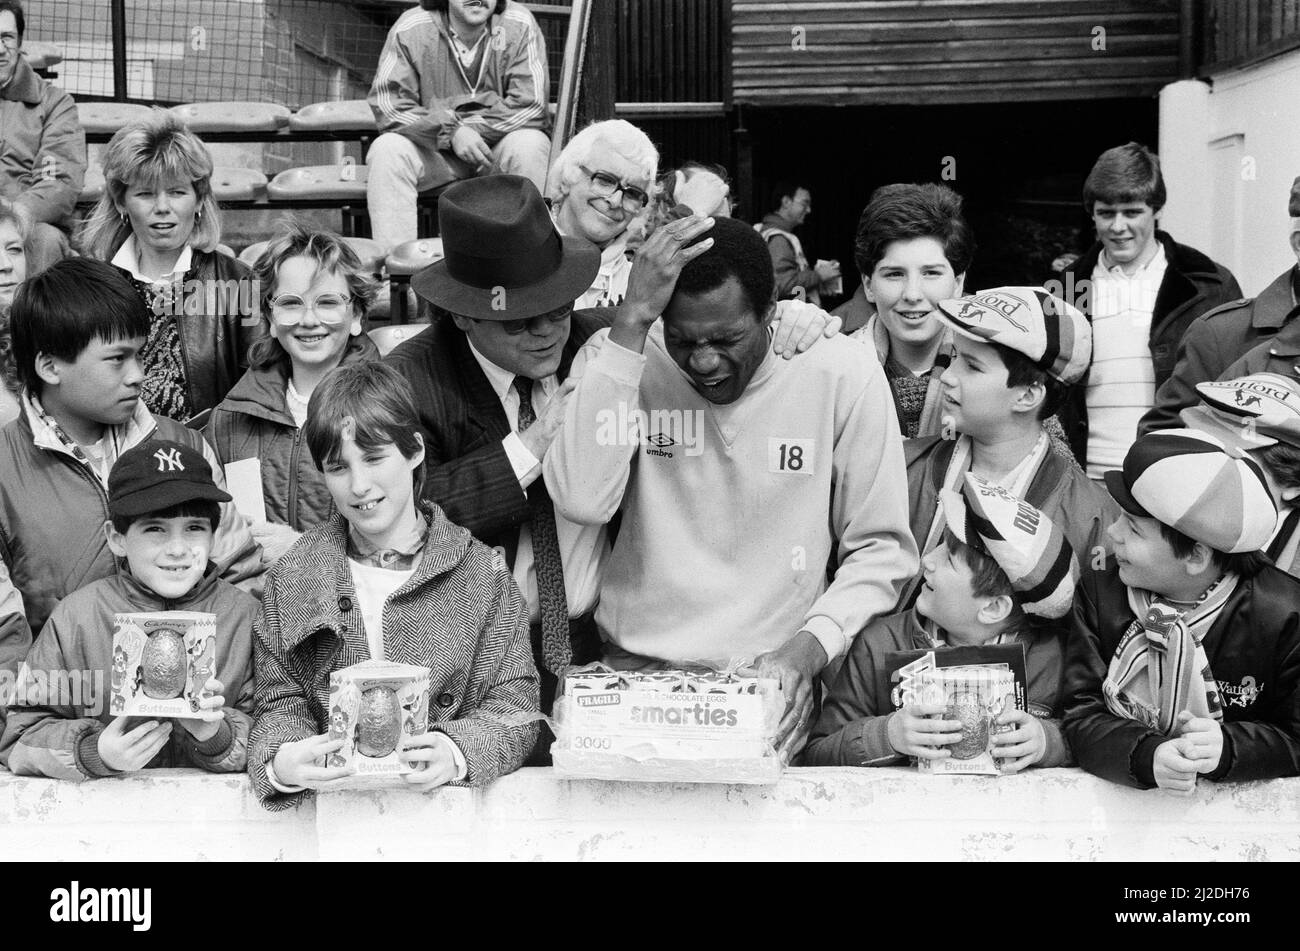 Pop star and Watford FC Chairman, Elton John, handing out Easter eggs to fans and clowning around with Luther Blissett. Watford v Southampton football match. 6th April 1985. Stock Photo